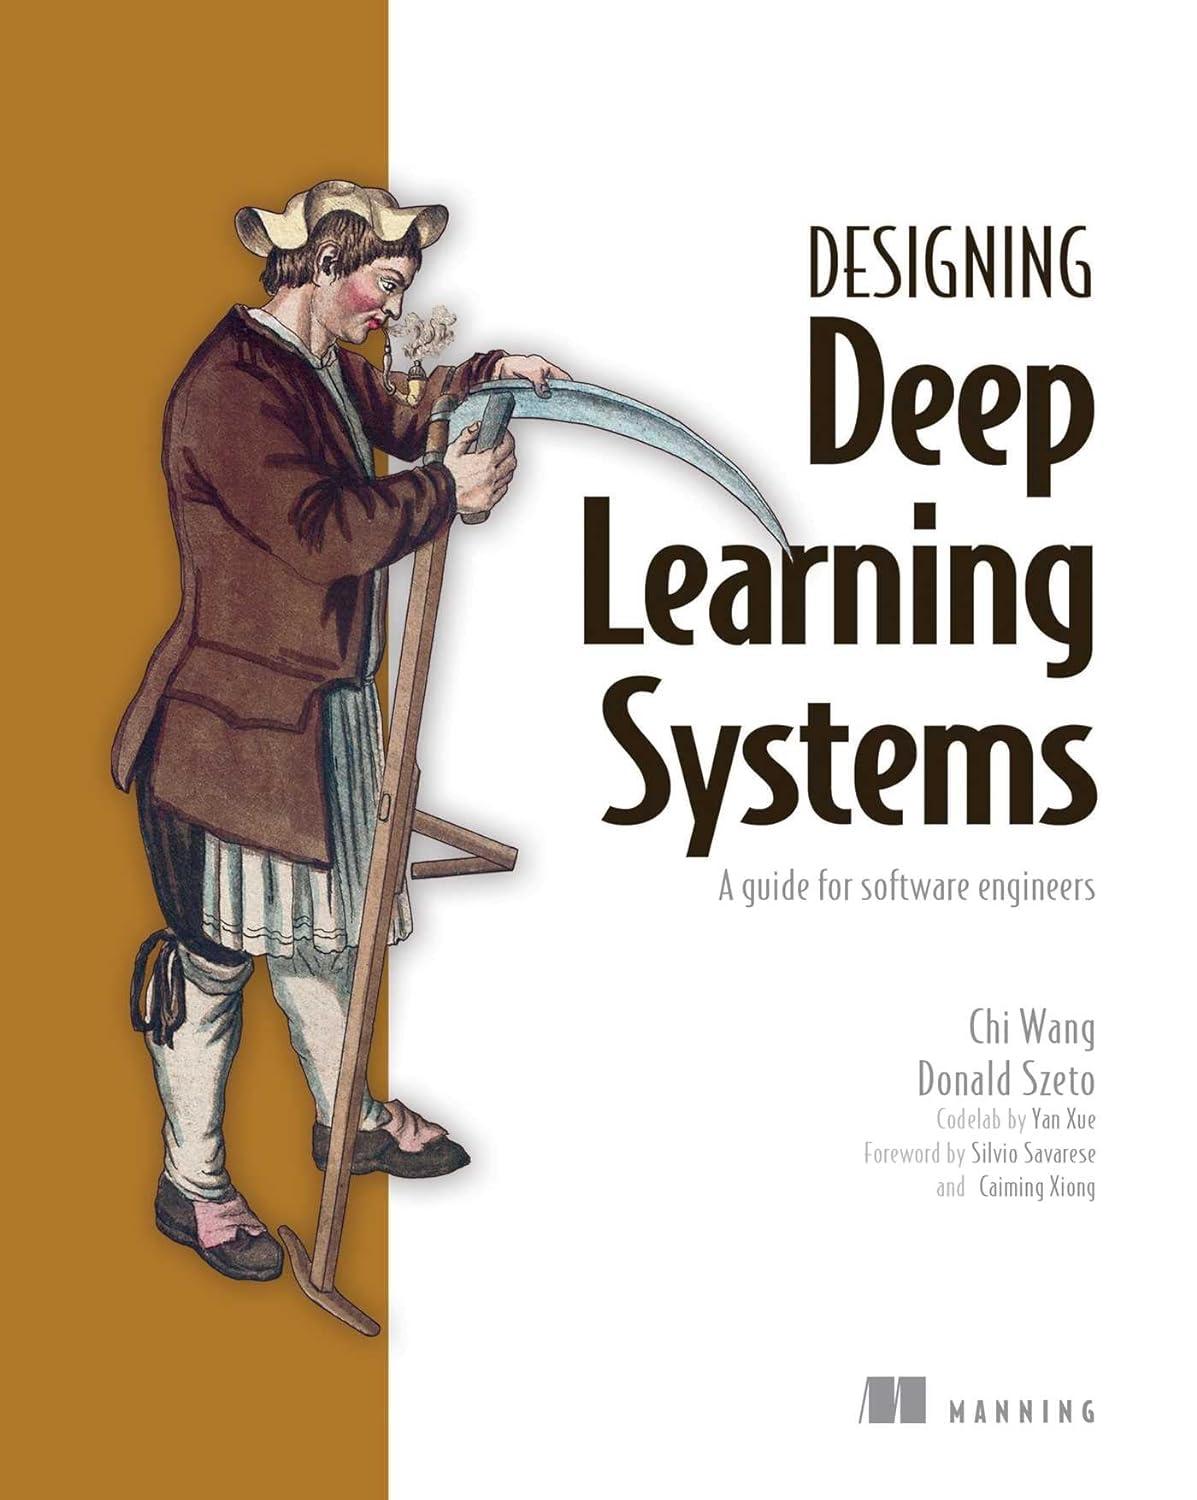 designing deep learning systems  a software engineer's guide 1st edition chi wang, donald szeto 1633439860,